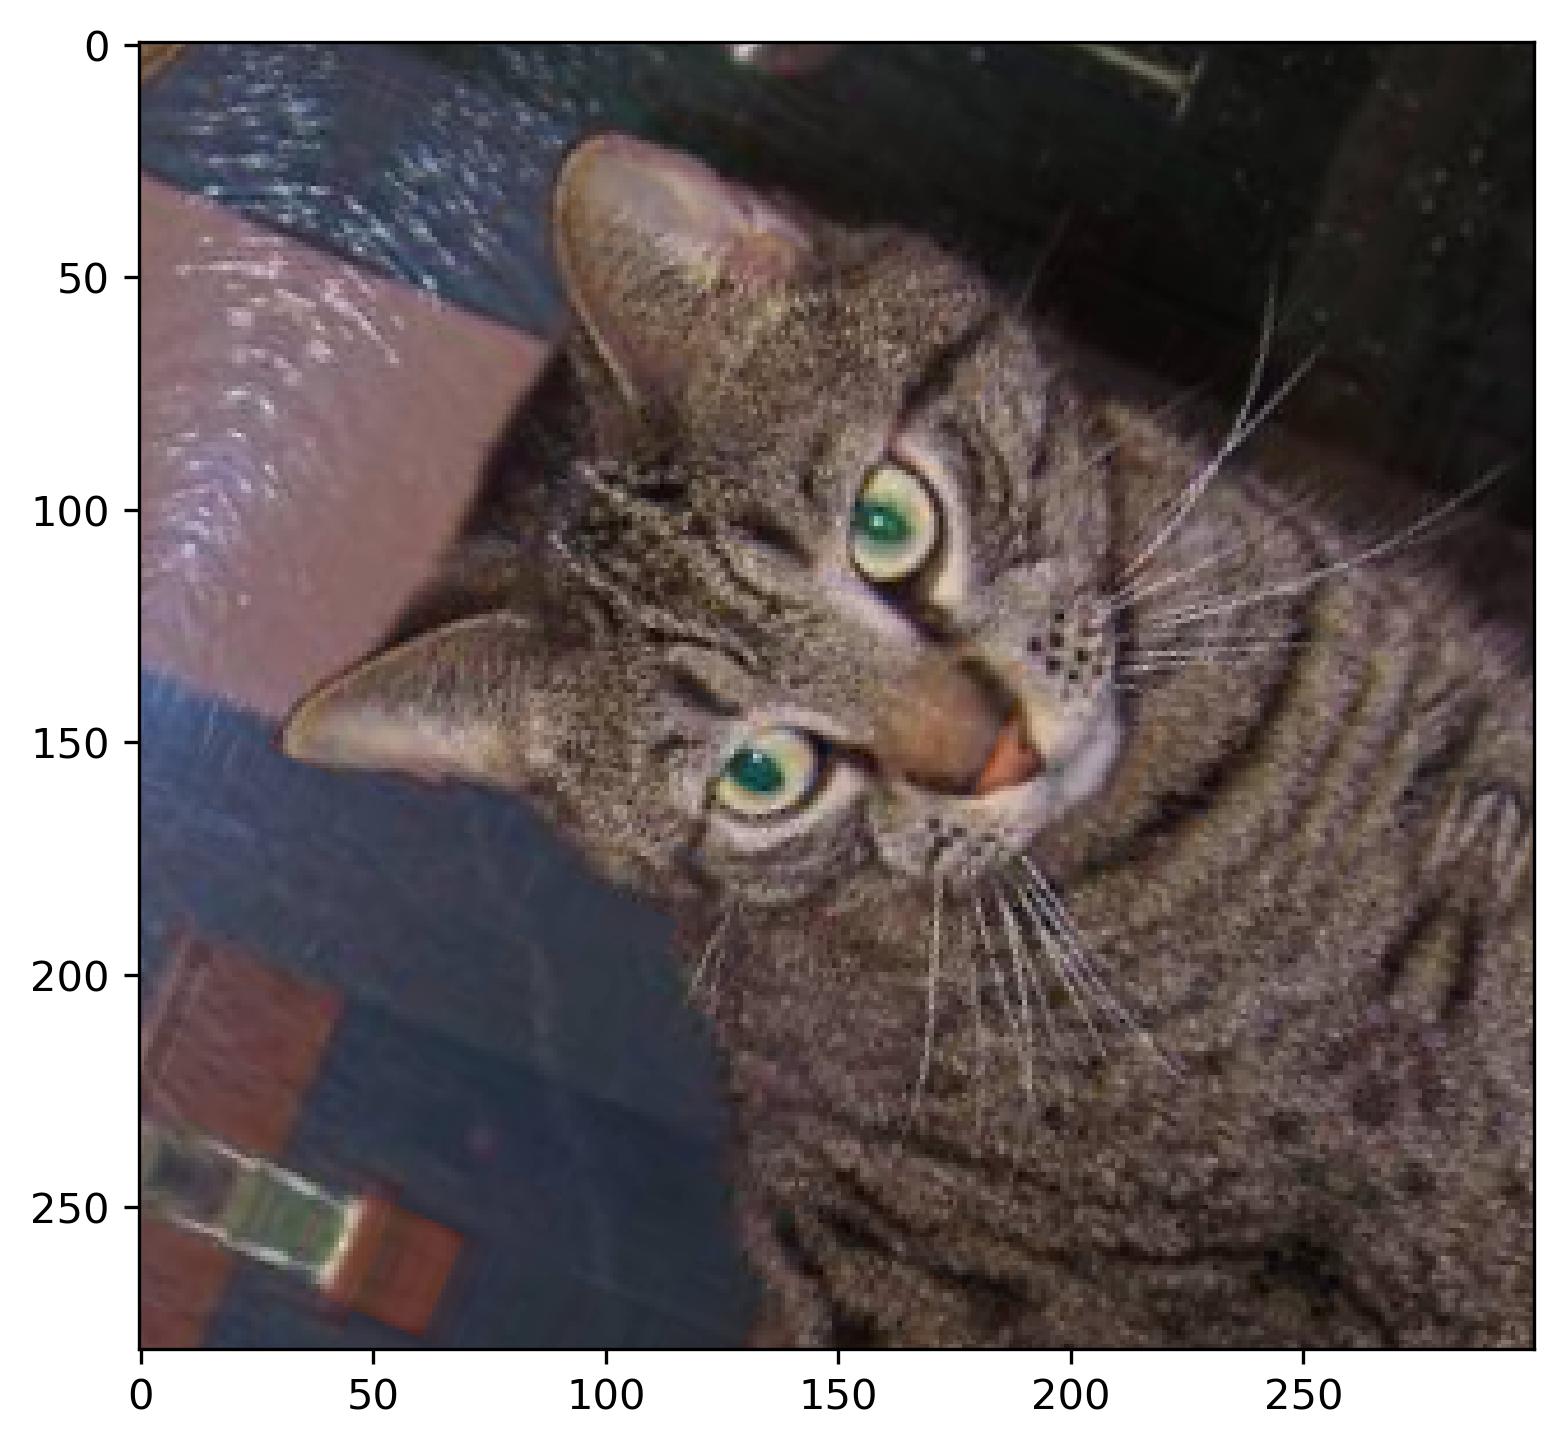 Image 4 - Cat image after flipping and rotating (image by author)